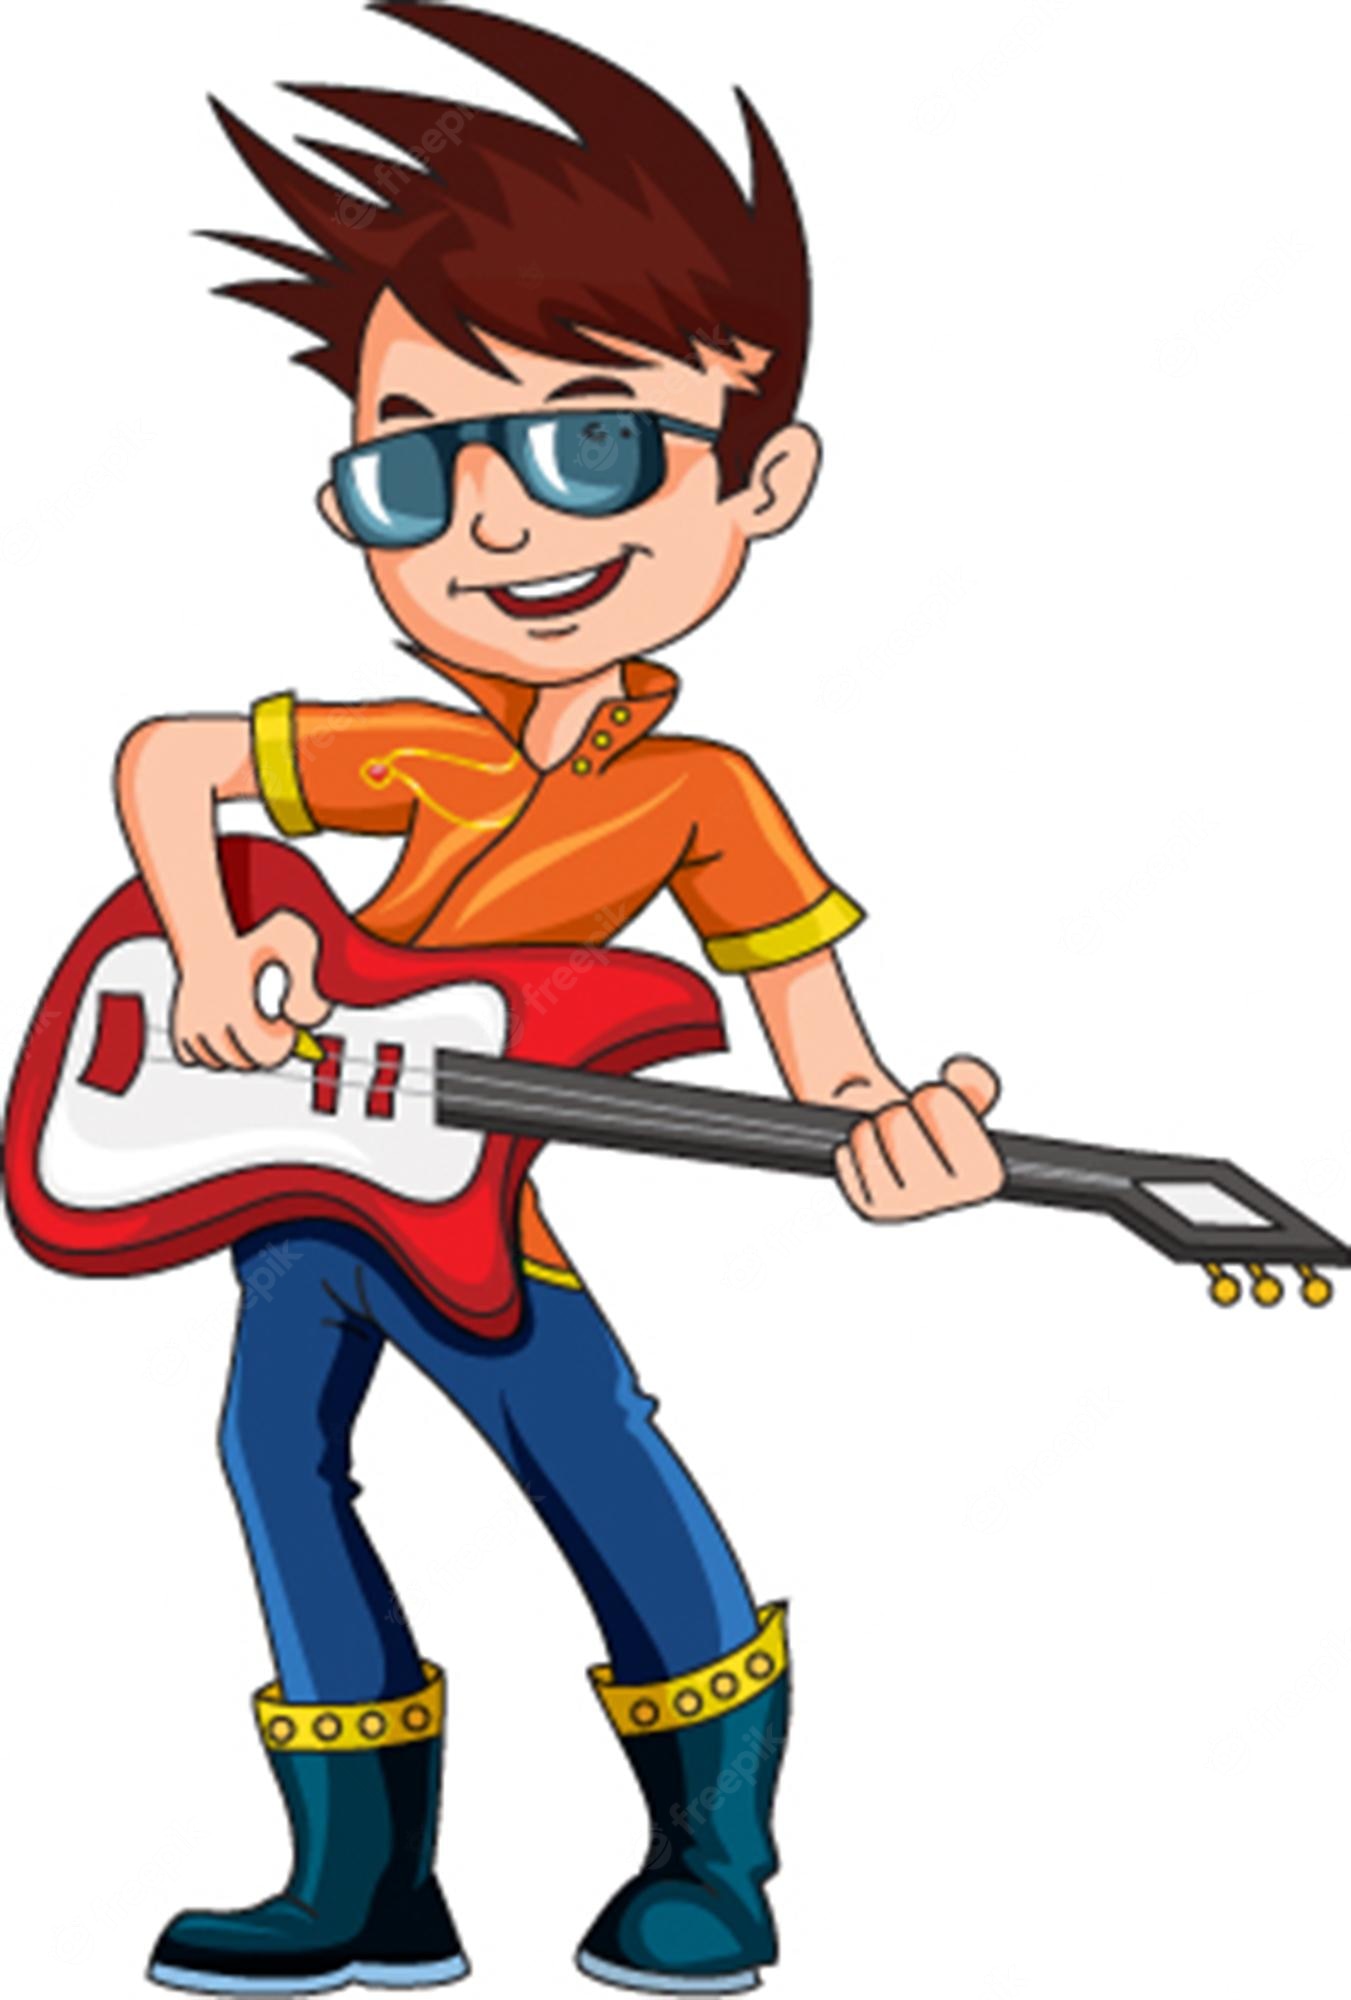 Free Rock Star Art Download Free Rock Star Art Png Images Free Cliparts On Clipart Library 1718